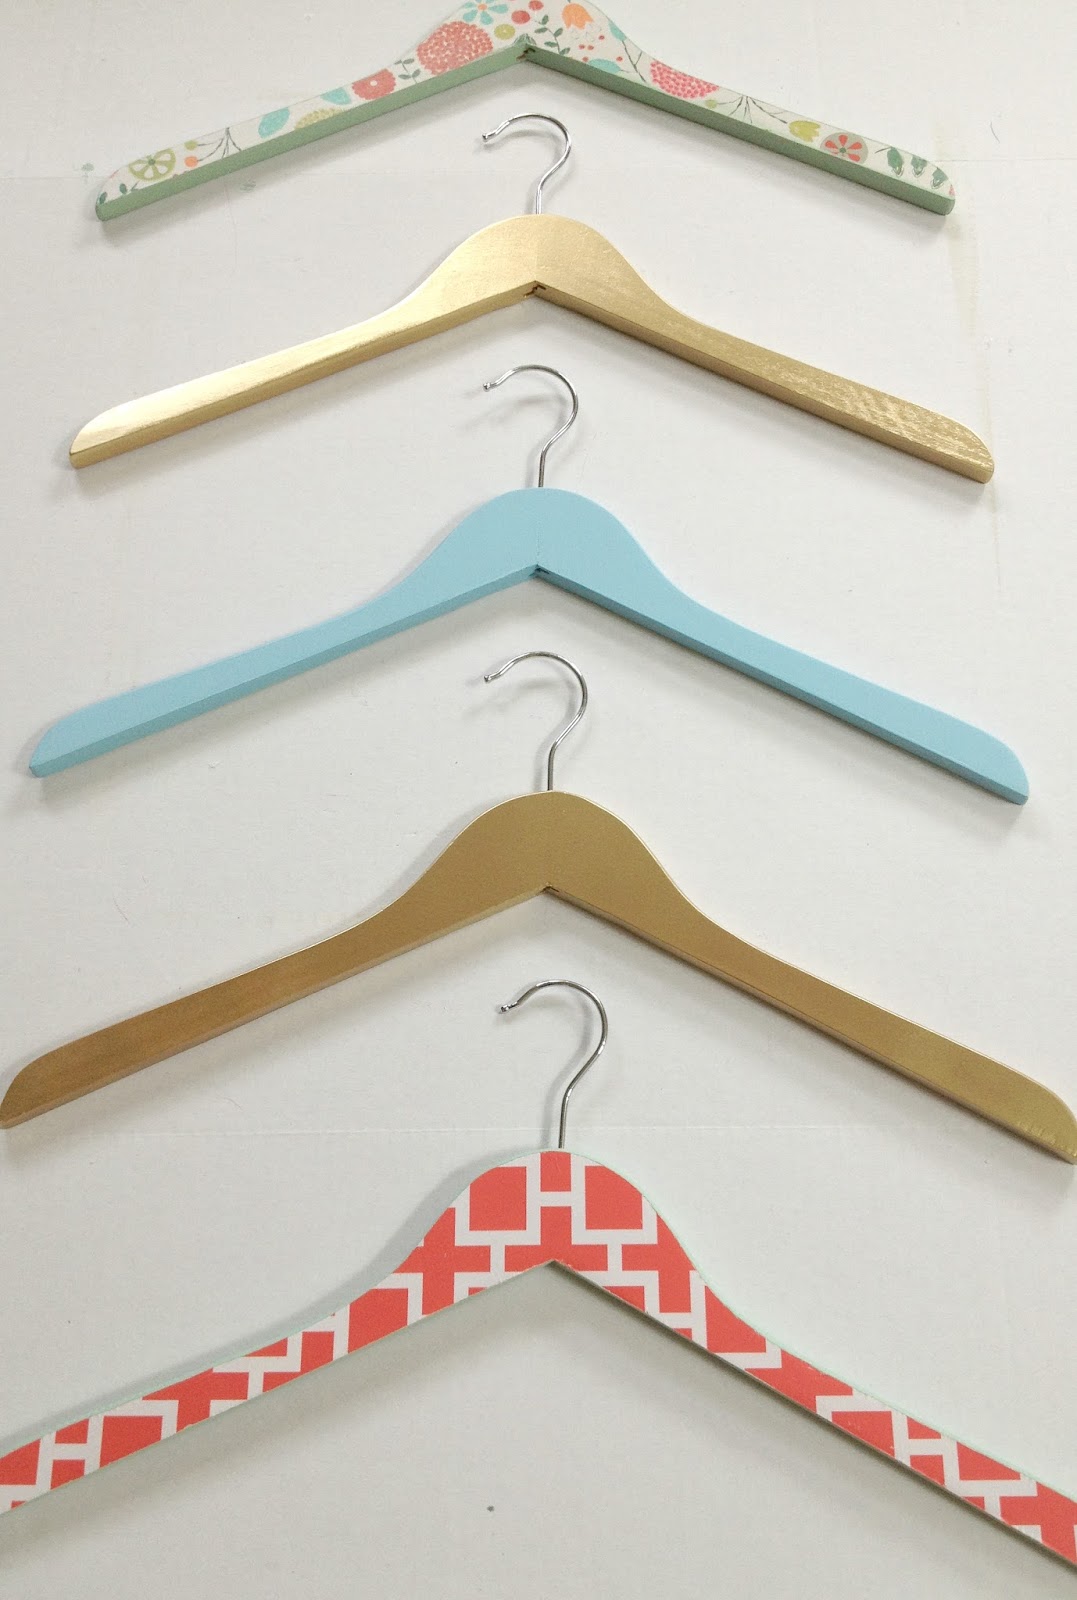 17 Clothes Hanger Tips and Tricks